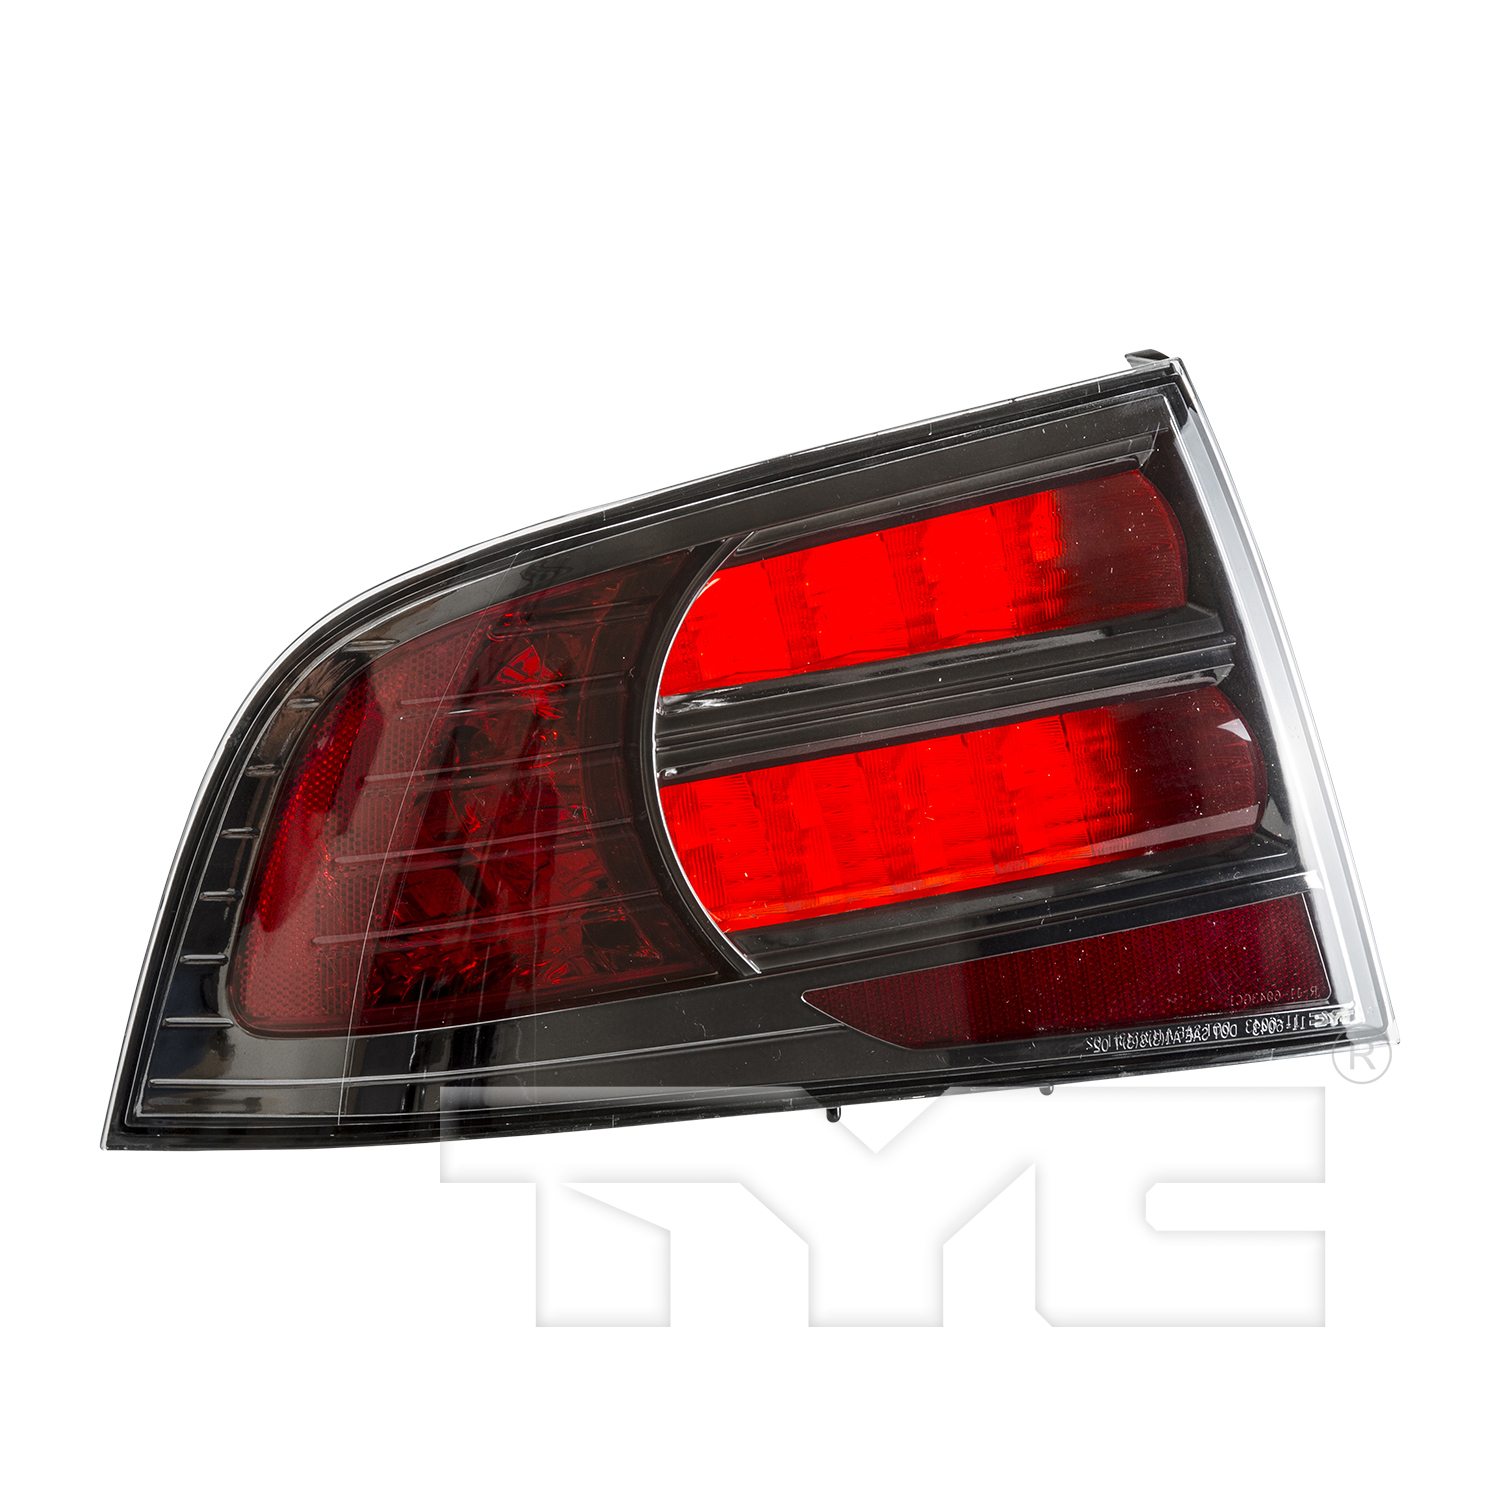 Aftermarket TAILLIGHTS for ACURA - TL, TL,07-08,LT Taillamp lens/housing